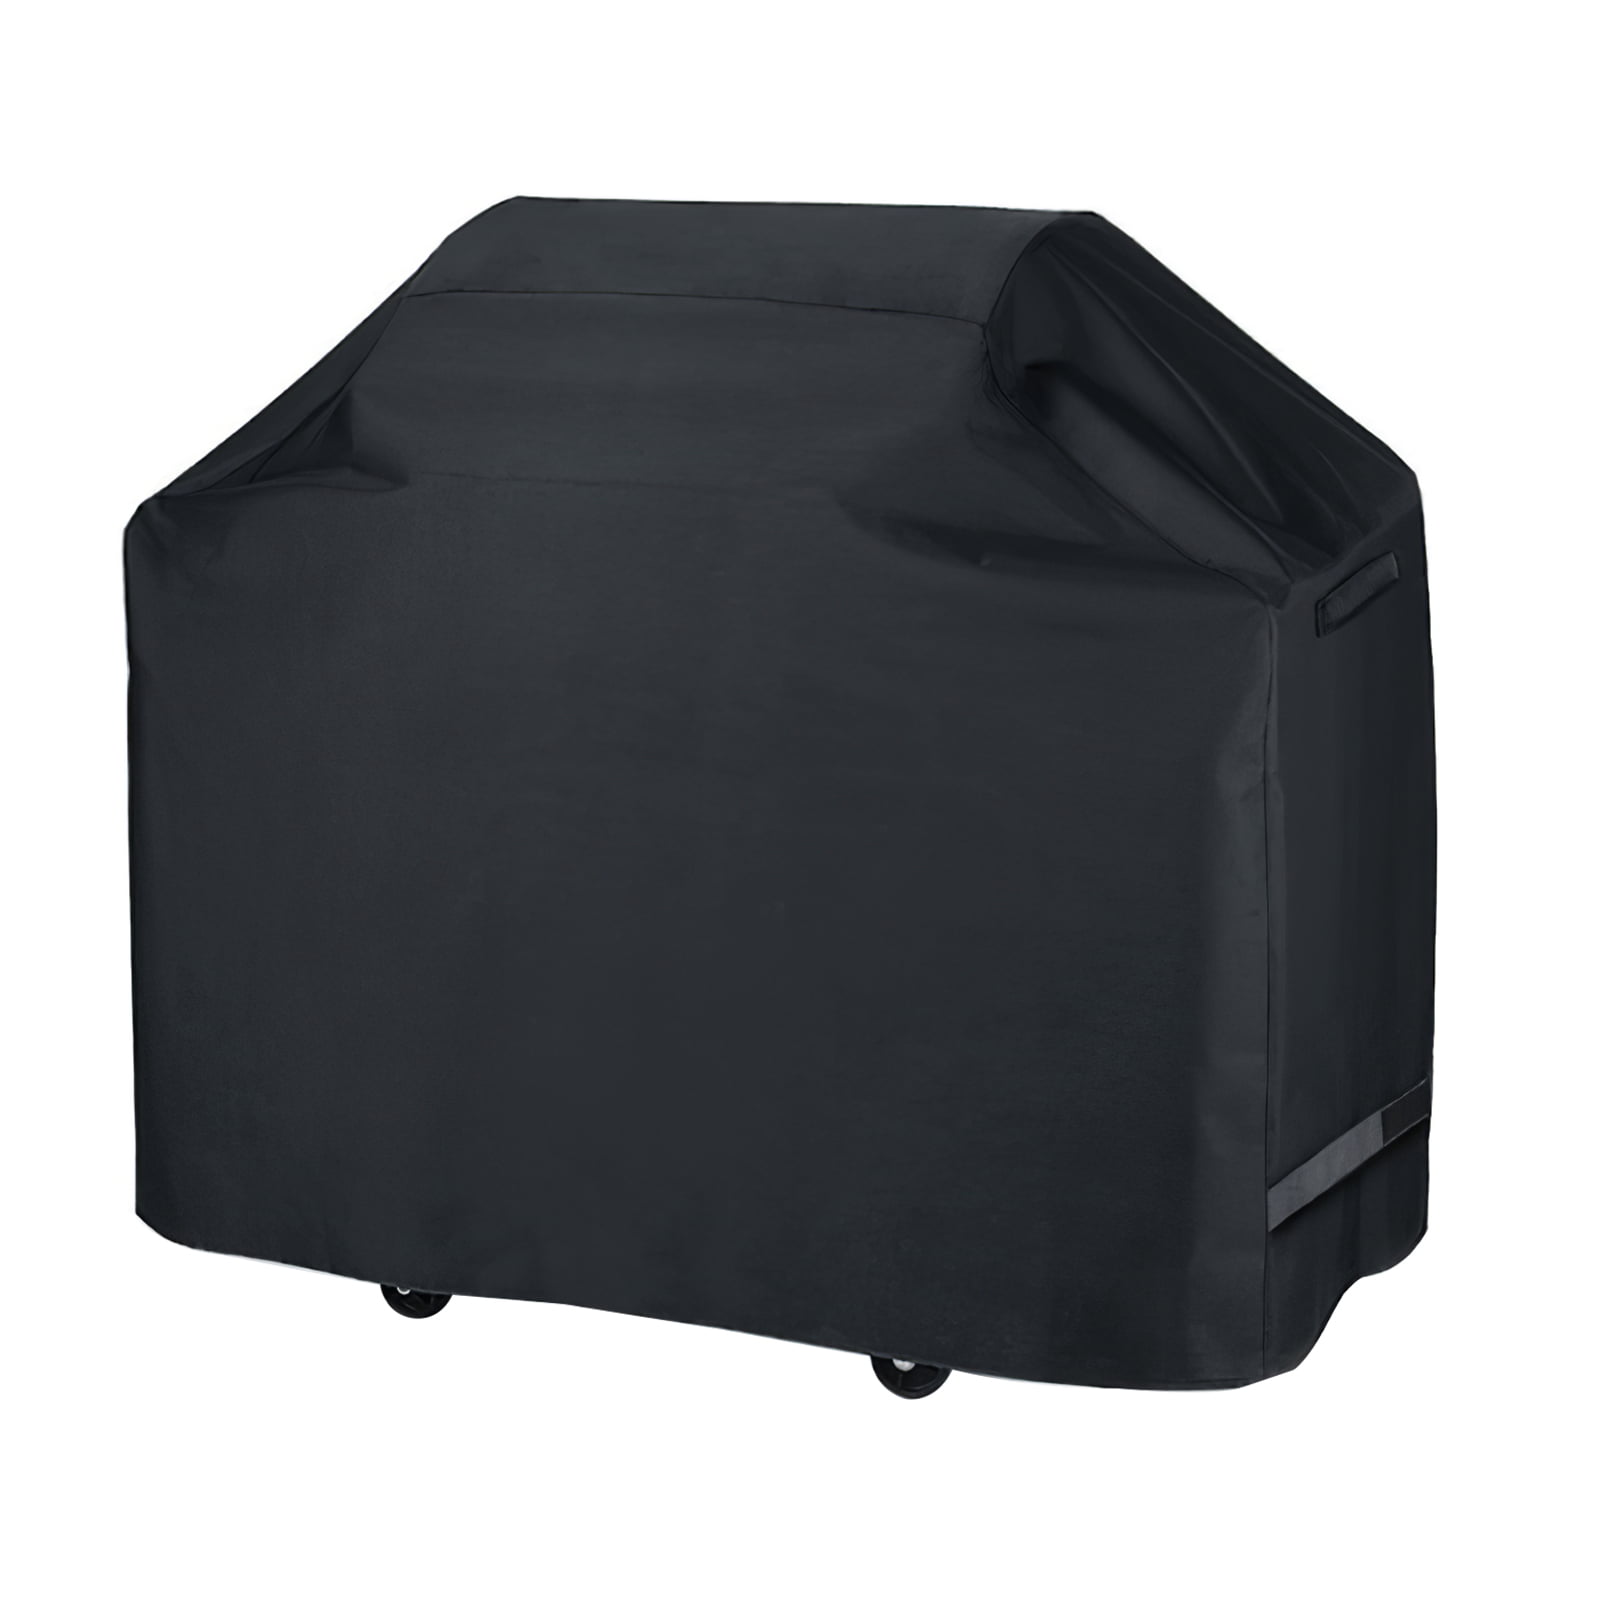 210D oxford fabric gas barbecue cover with Ezilif weatherproof barbecue cover 